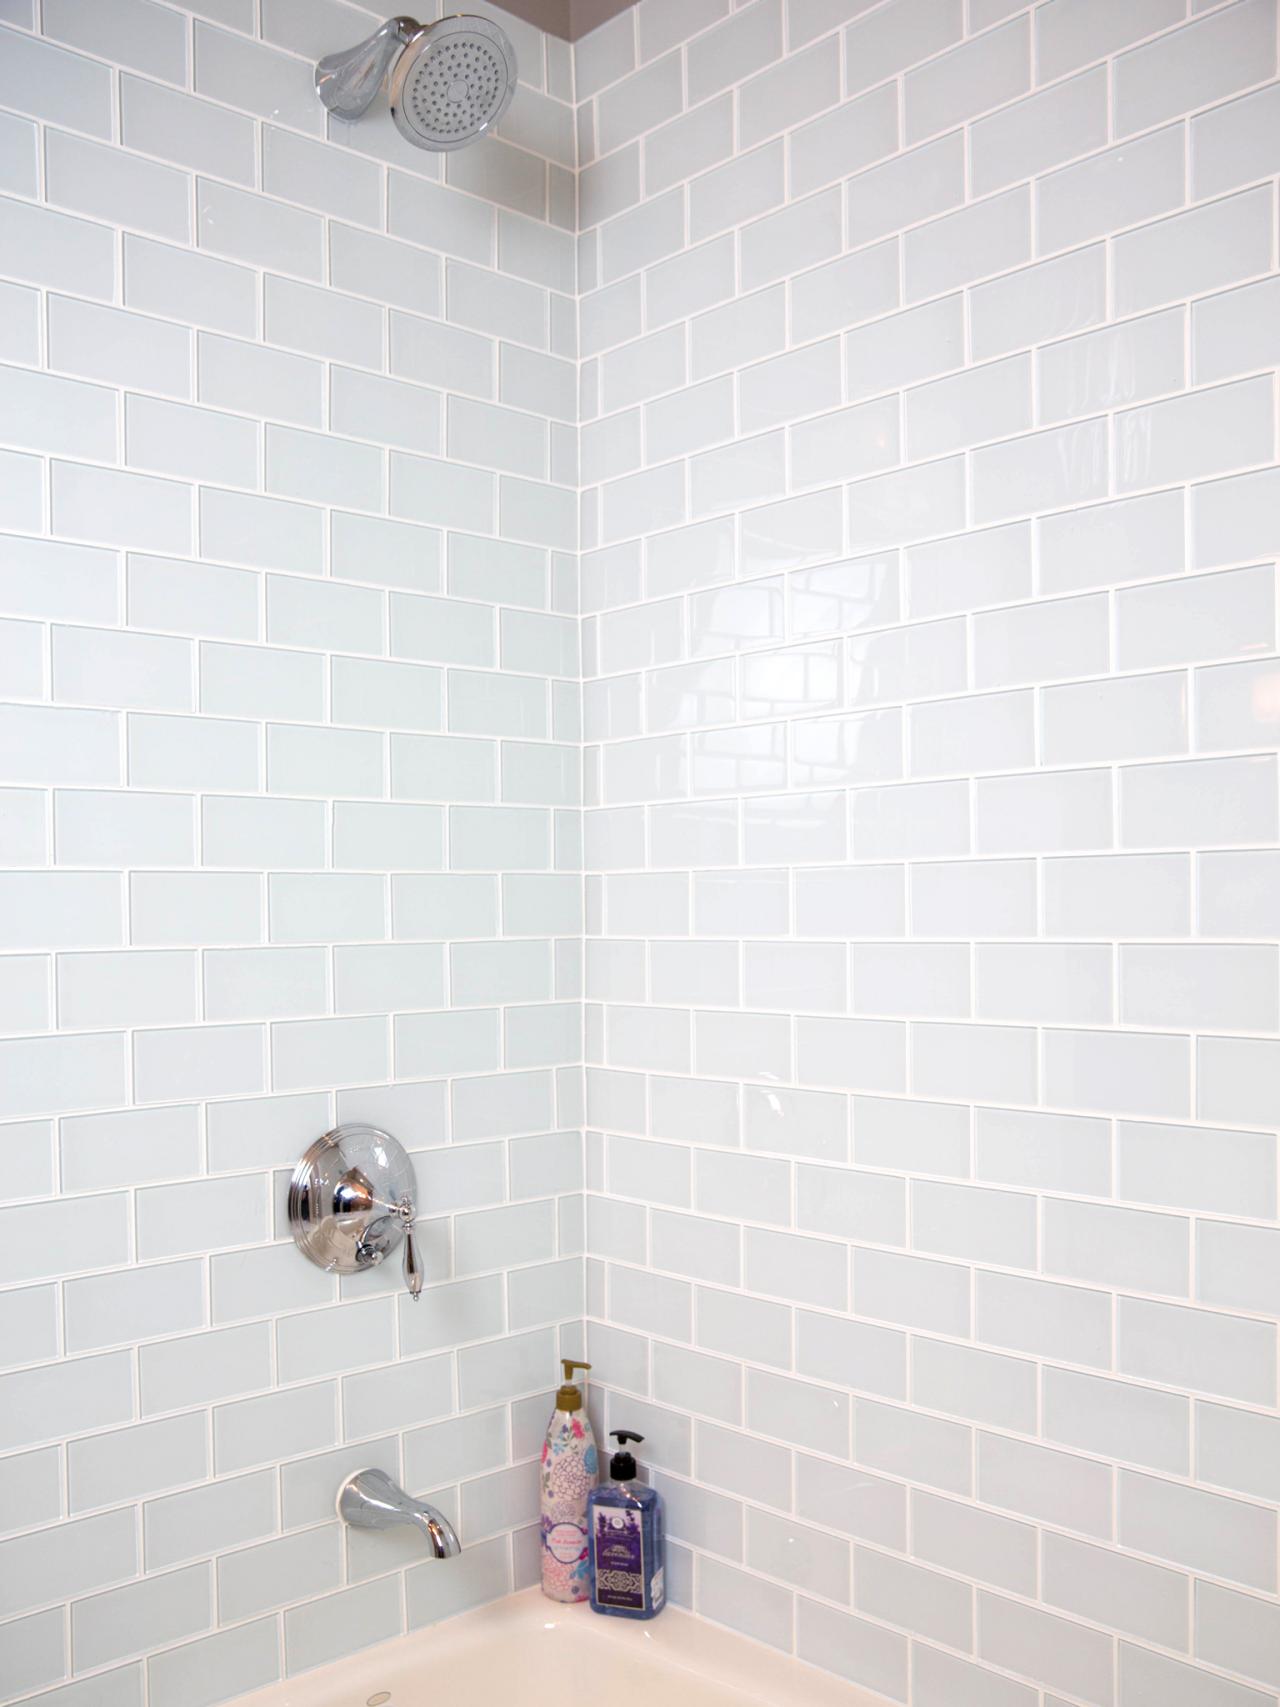 How To Install A Shower Tile Wall, How To Lay Tile In Bathroom Wall